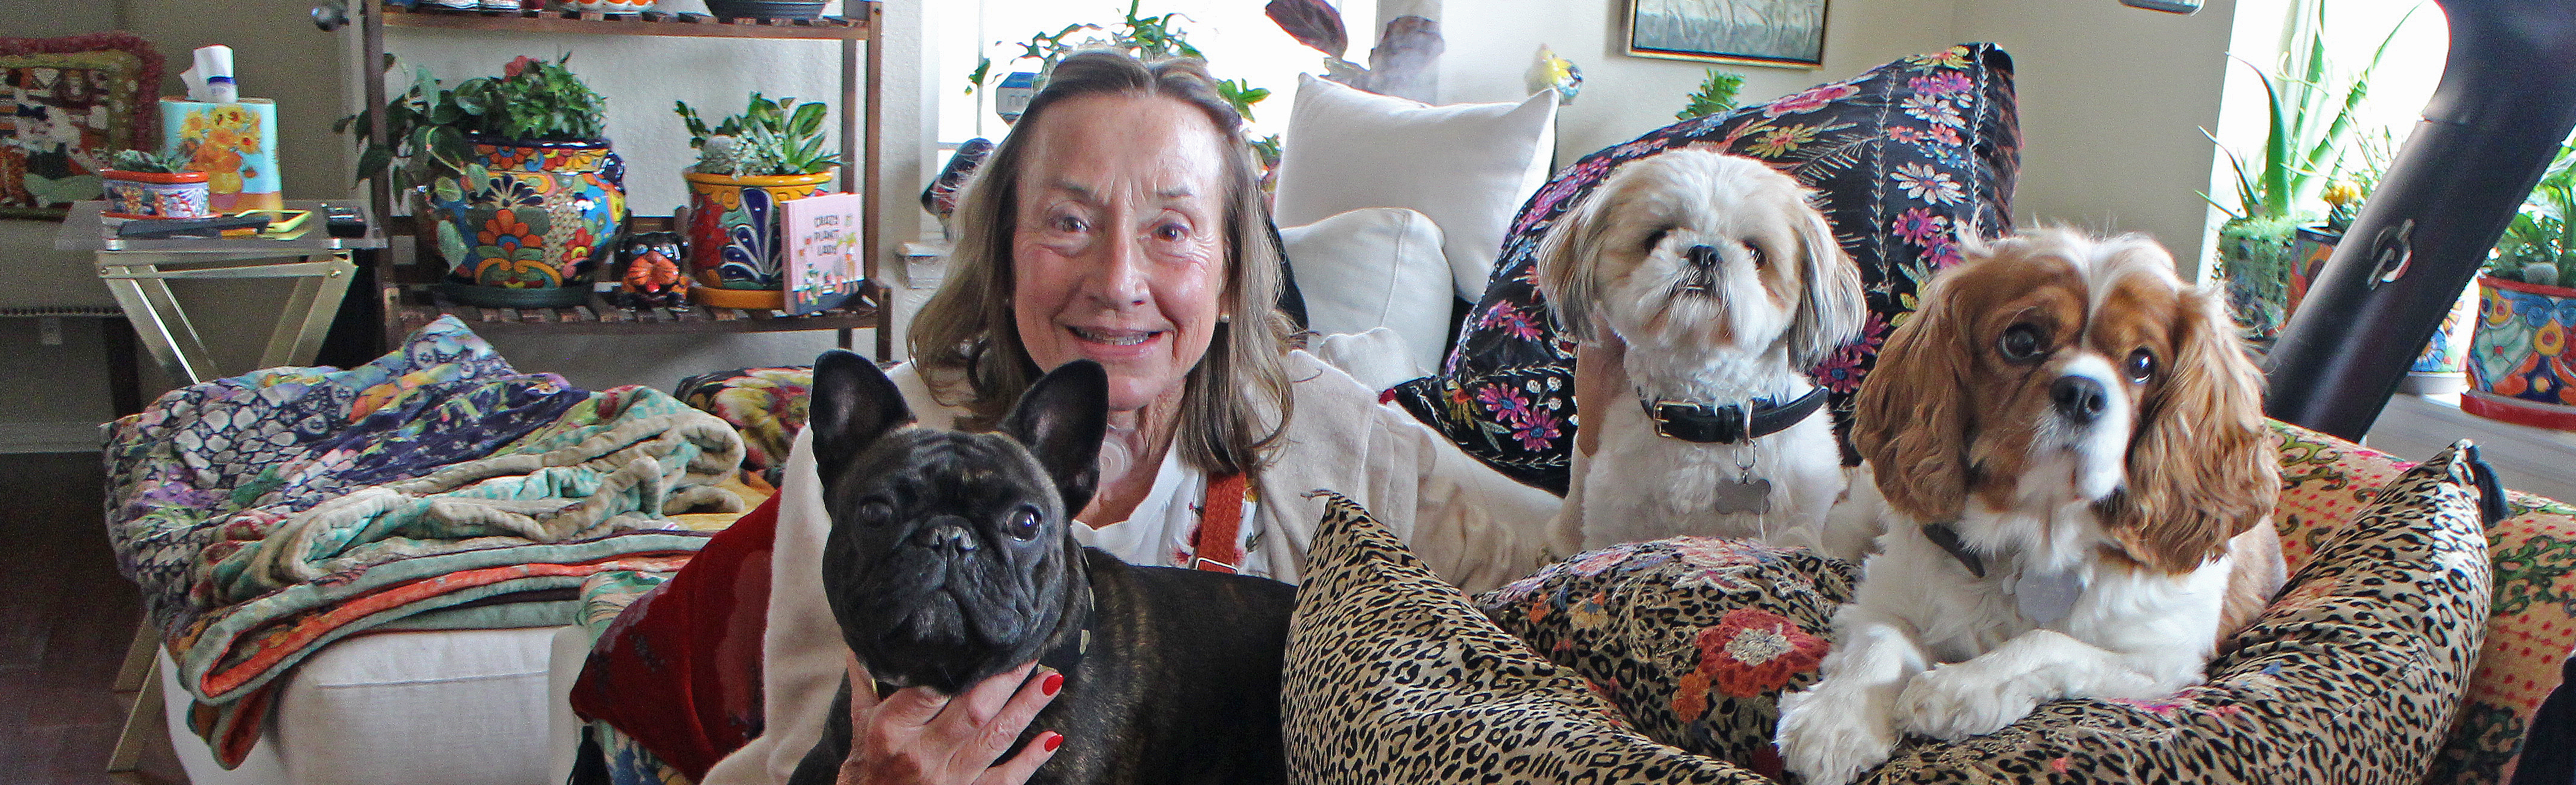 Jane Hart in her Denver home with three of her dogs